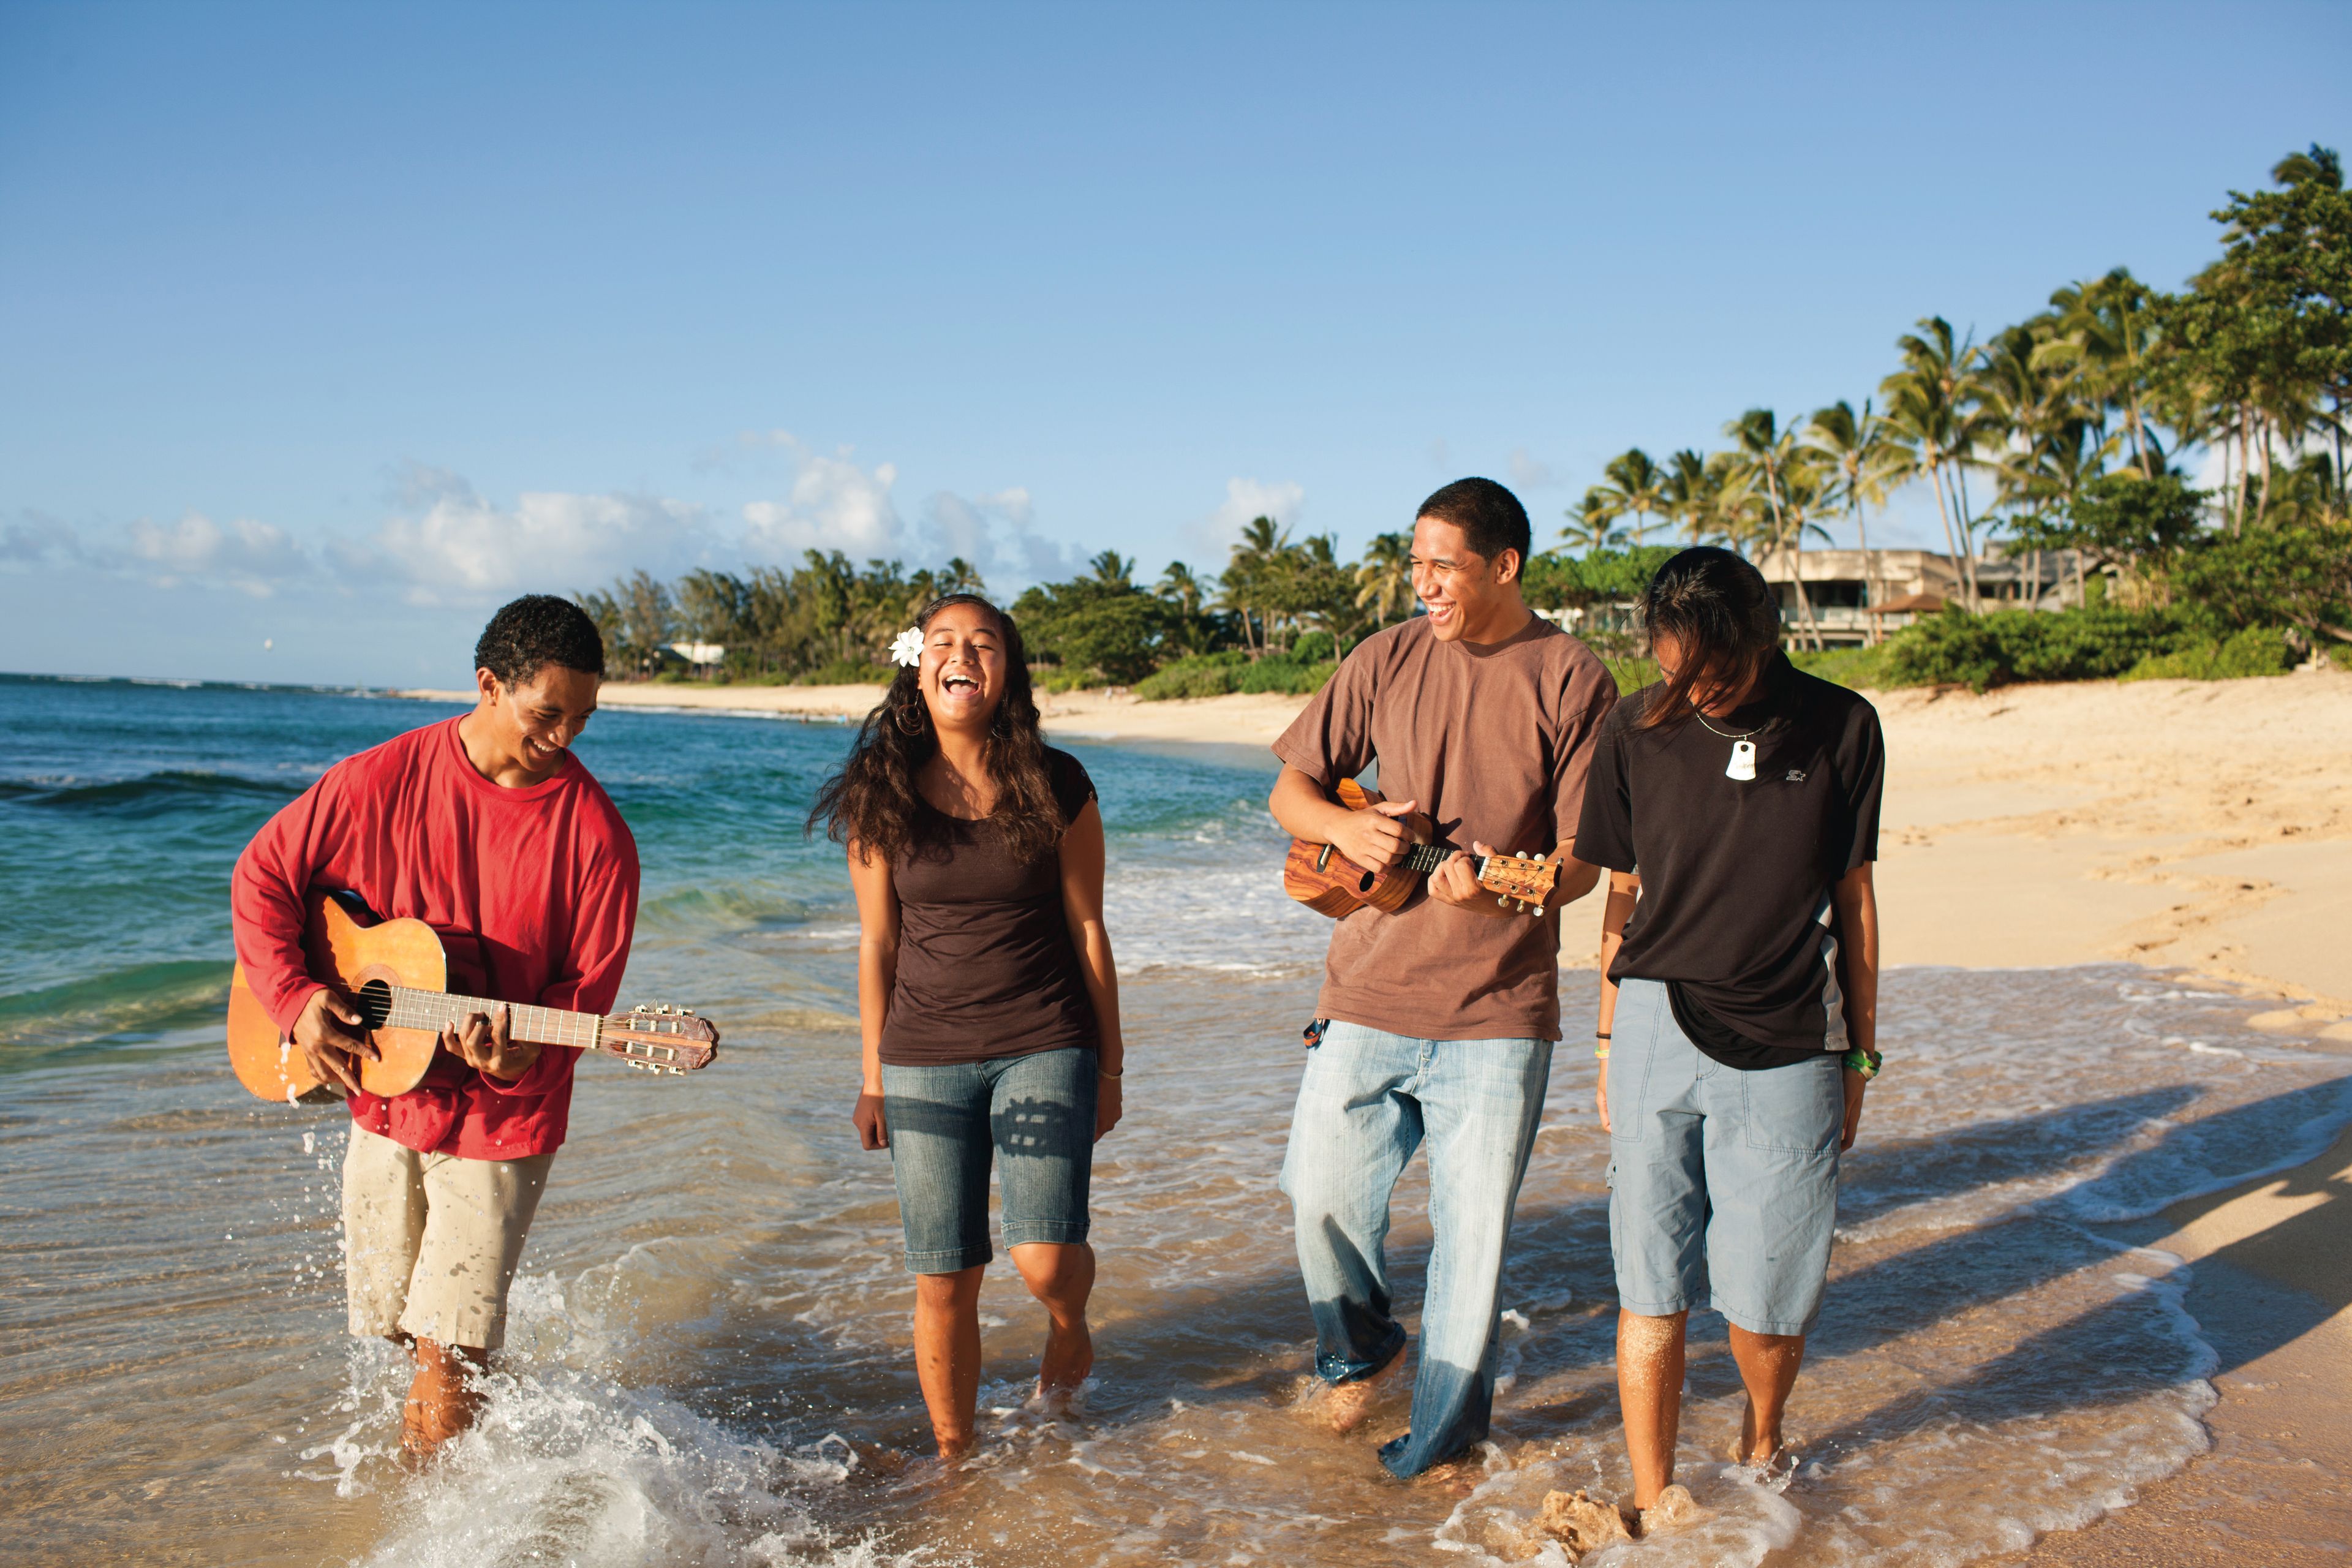 Some young men and young women play music and walk along the beach together.